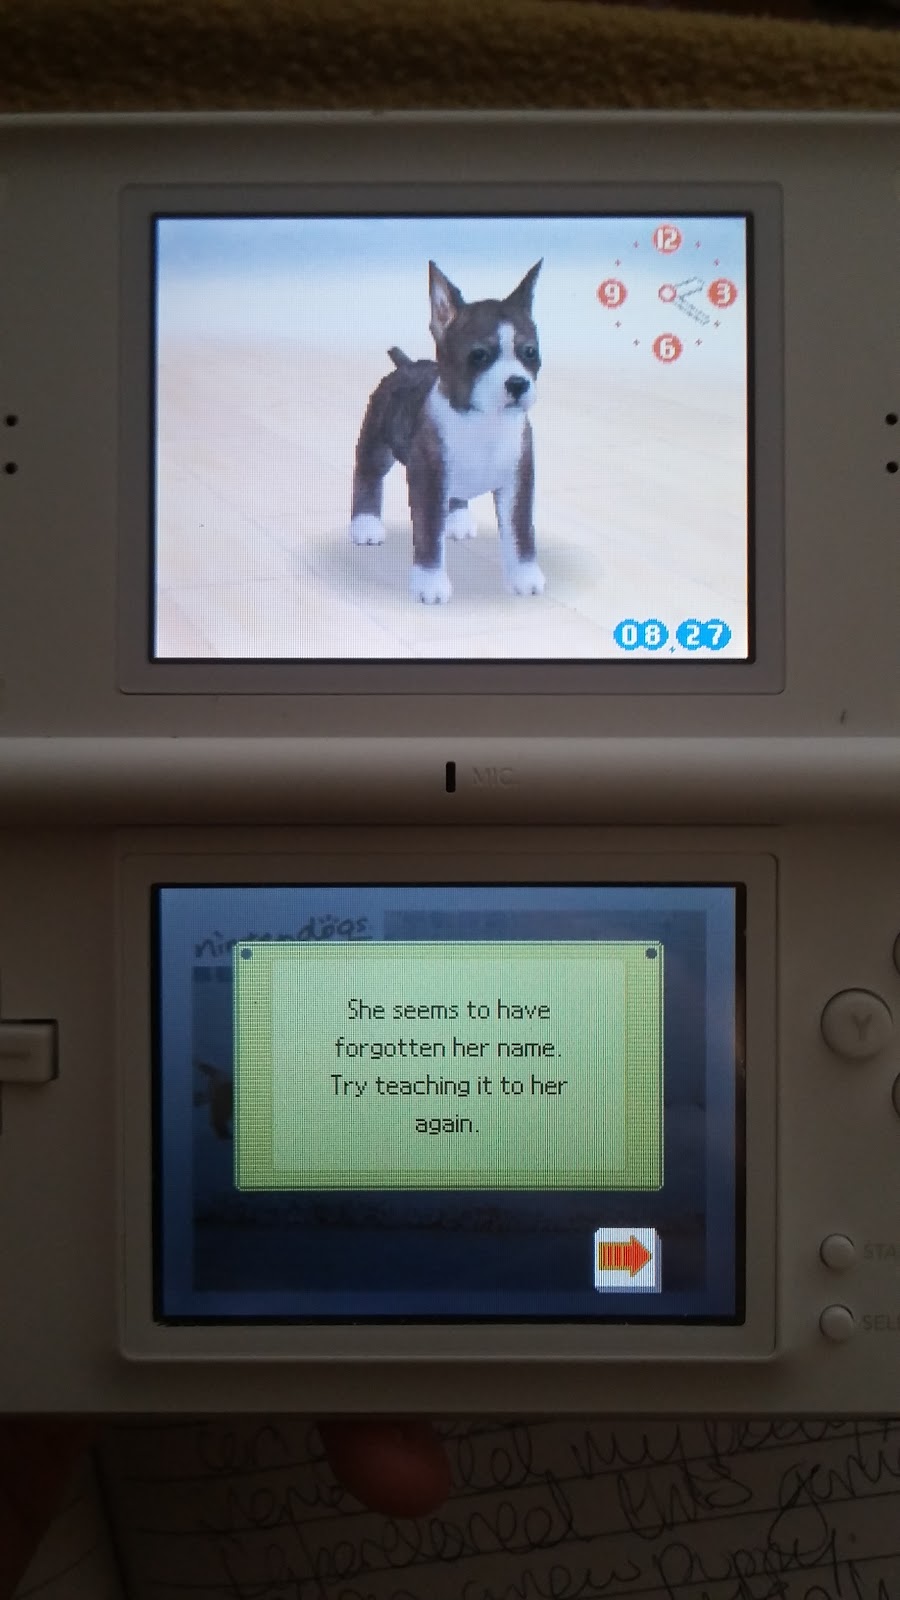 Abandoned Nintendogs Found Alive After Almost 10 Years